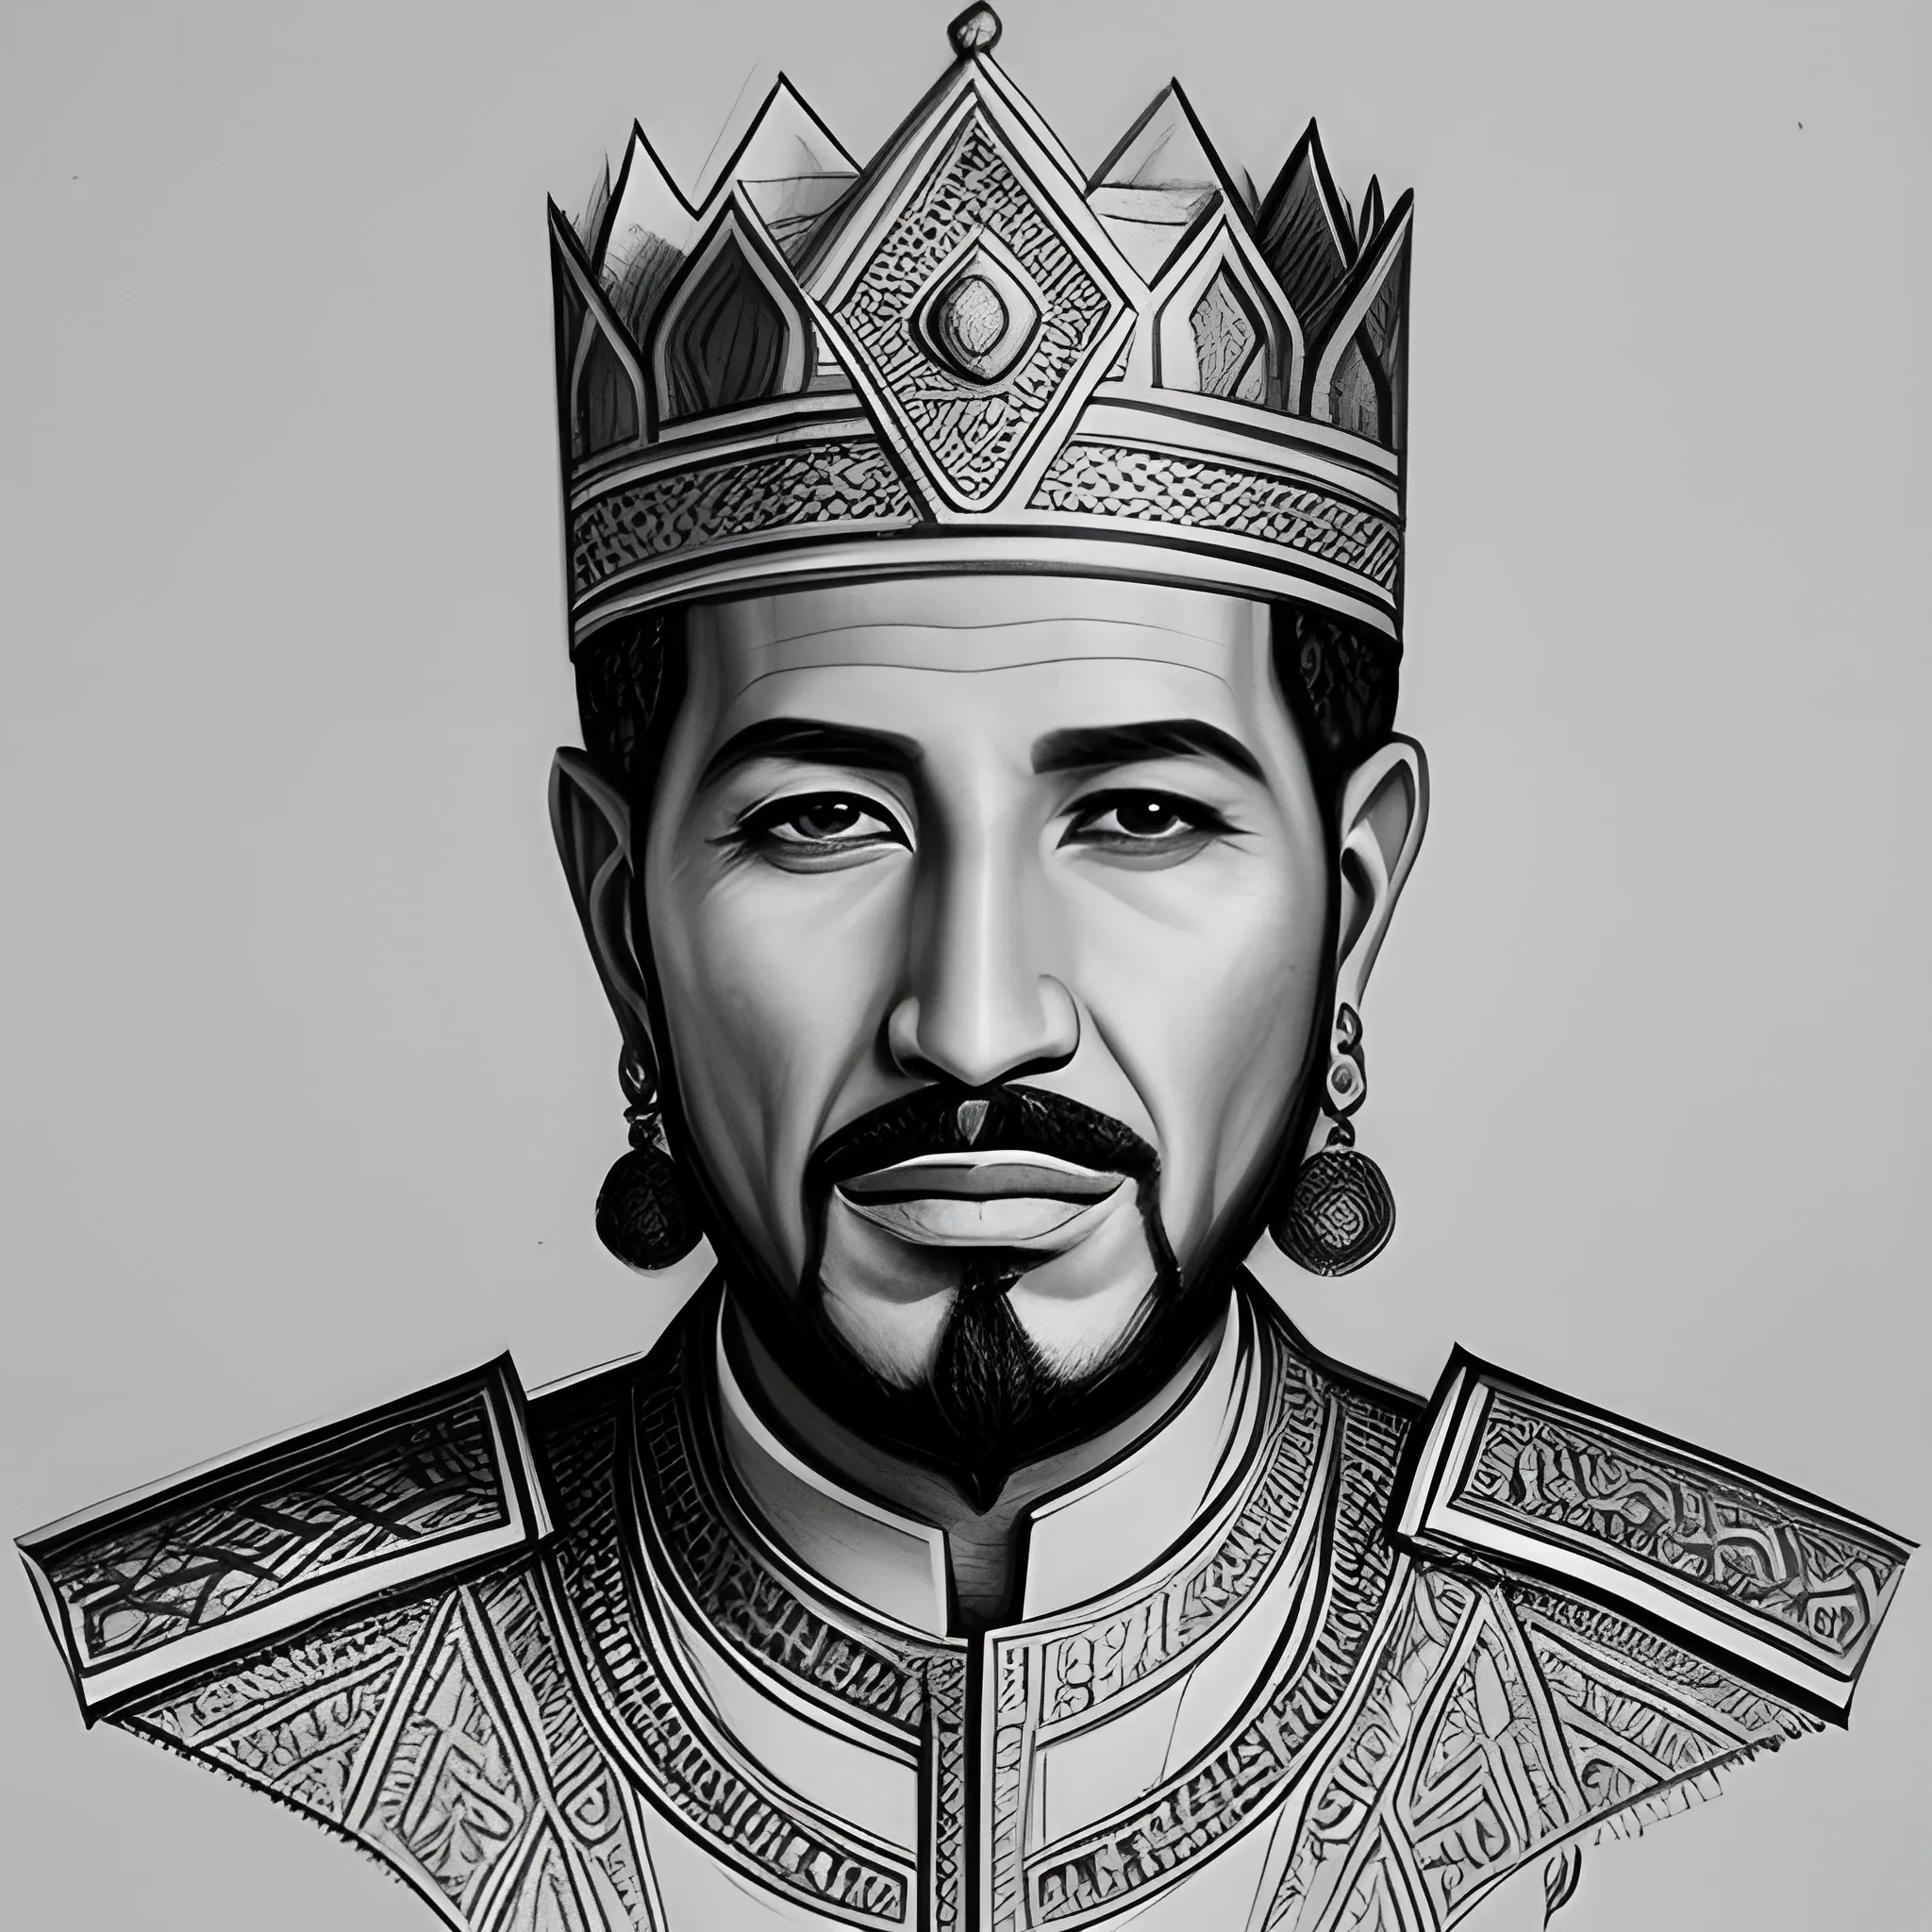 Morocco
King Mohammed 6
 Pencil Sketch